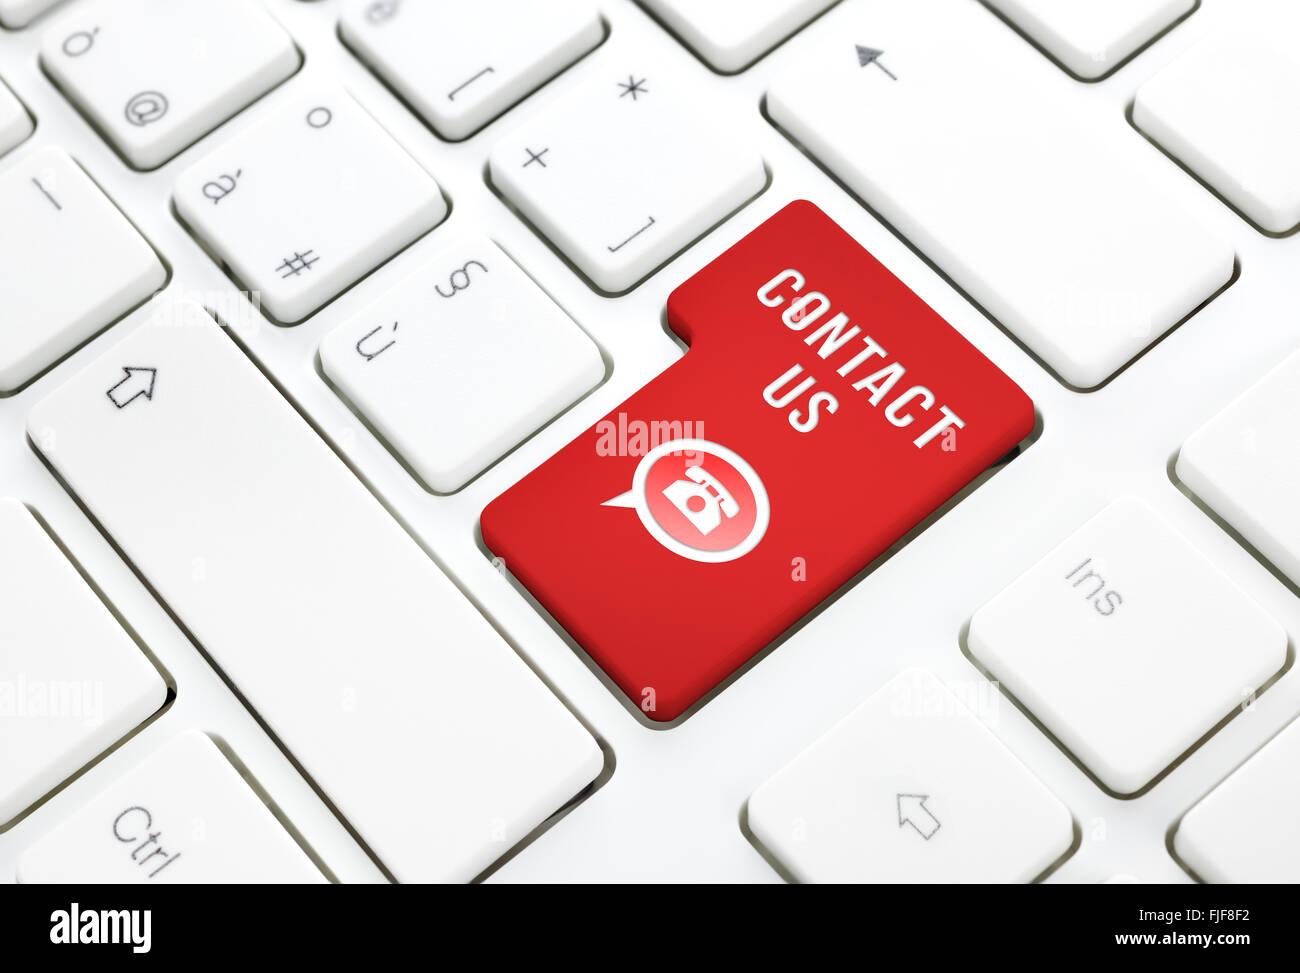 Contact us business concept, red enter button or key on white keyboard Stock Photo